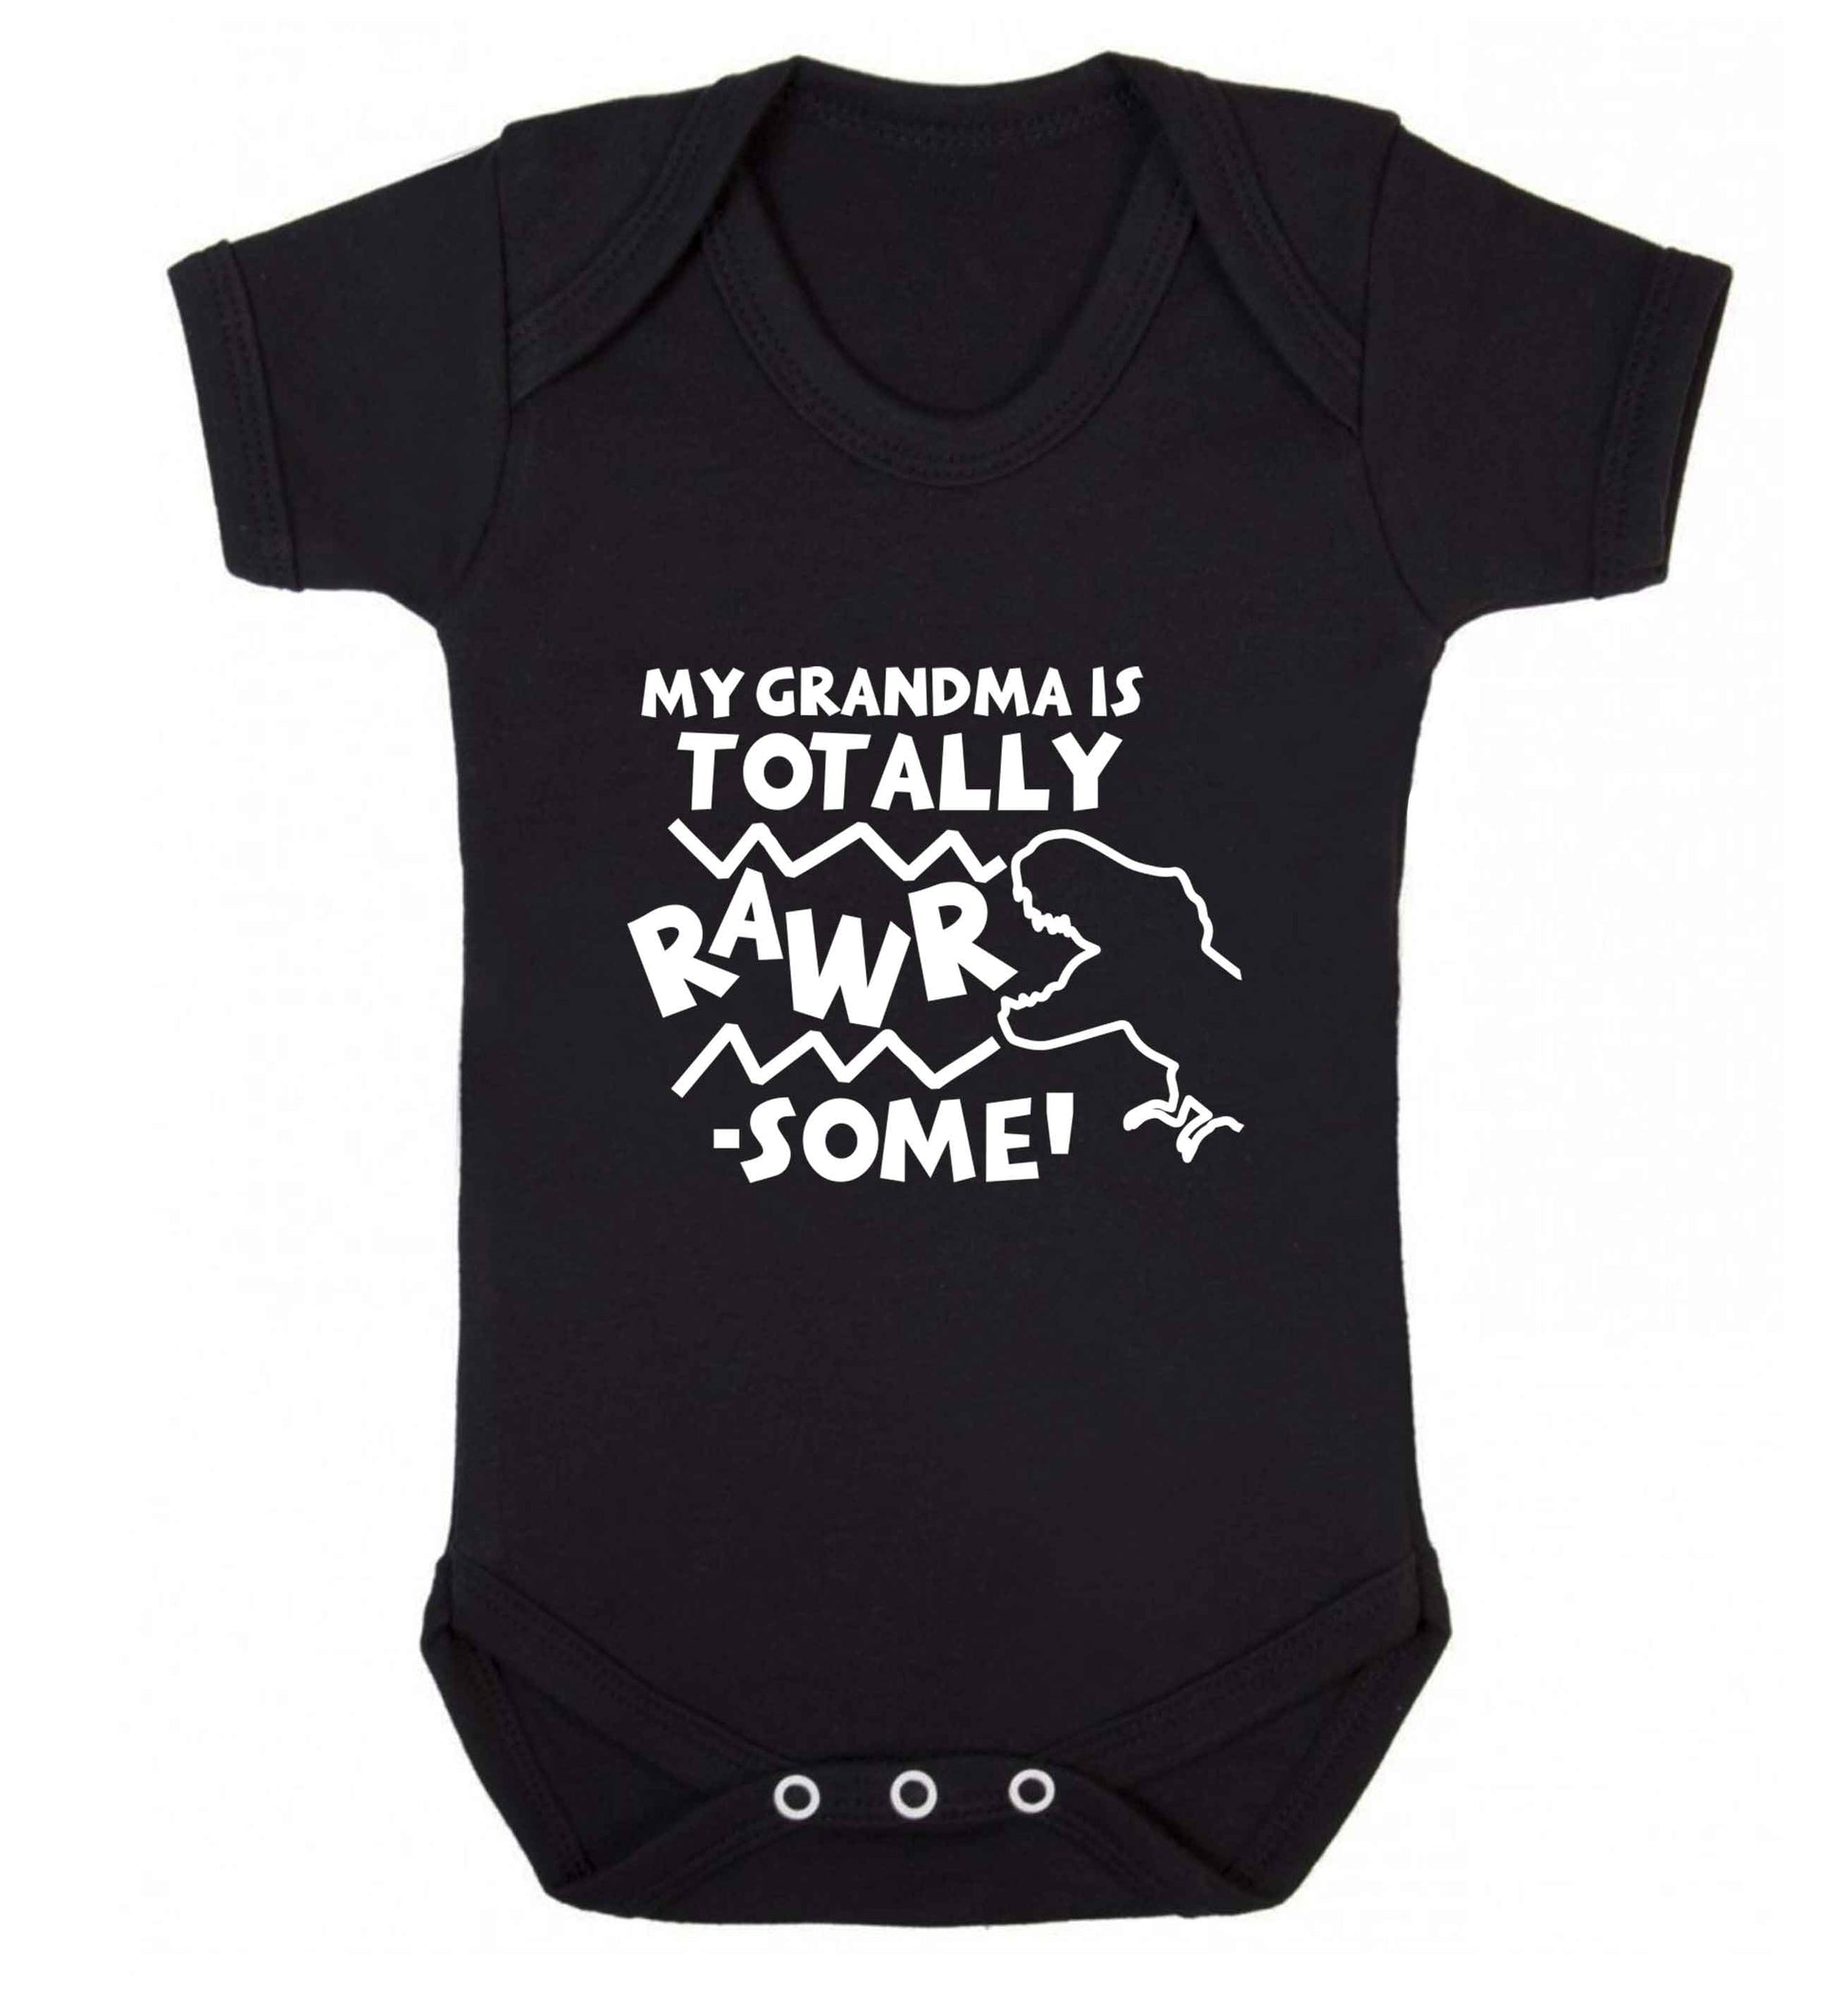 My grandma is totally rawrsome baby vest black 18-24 months